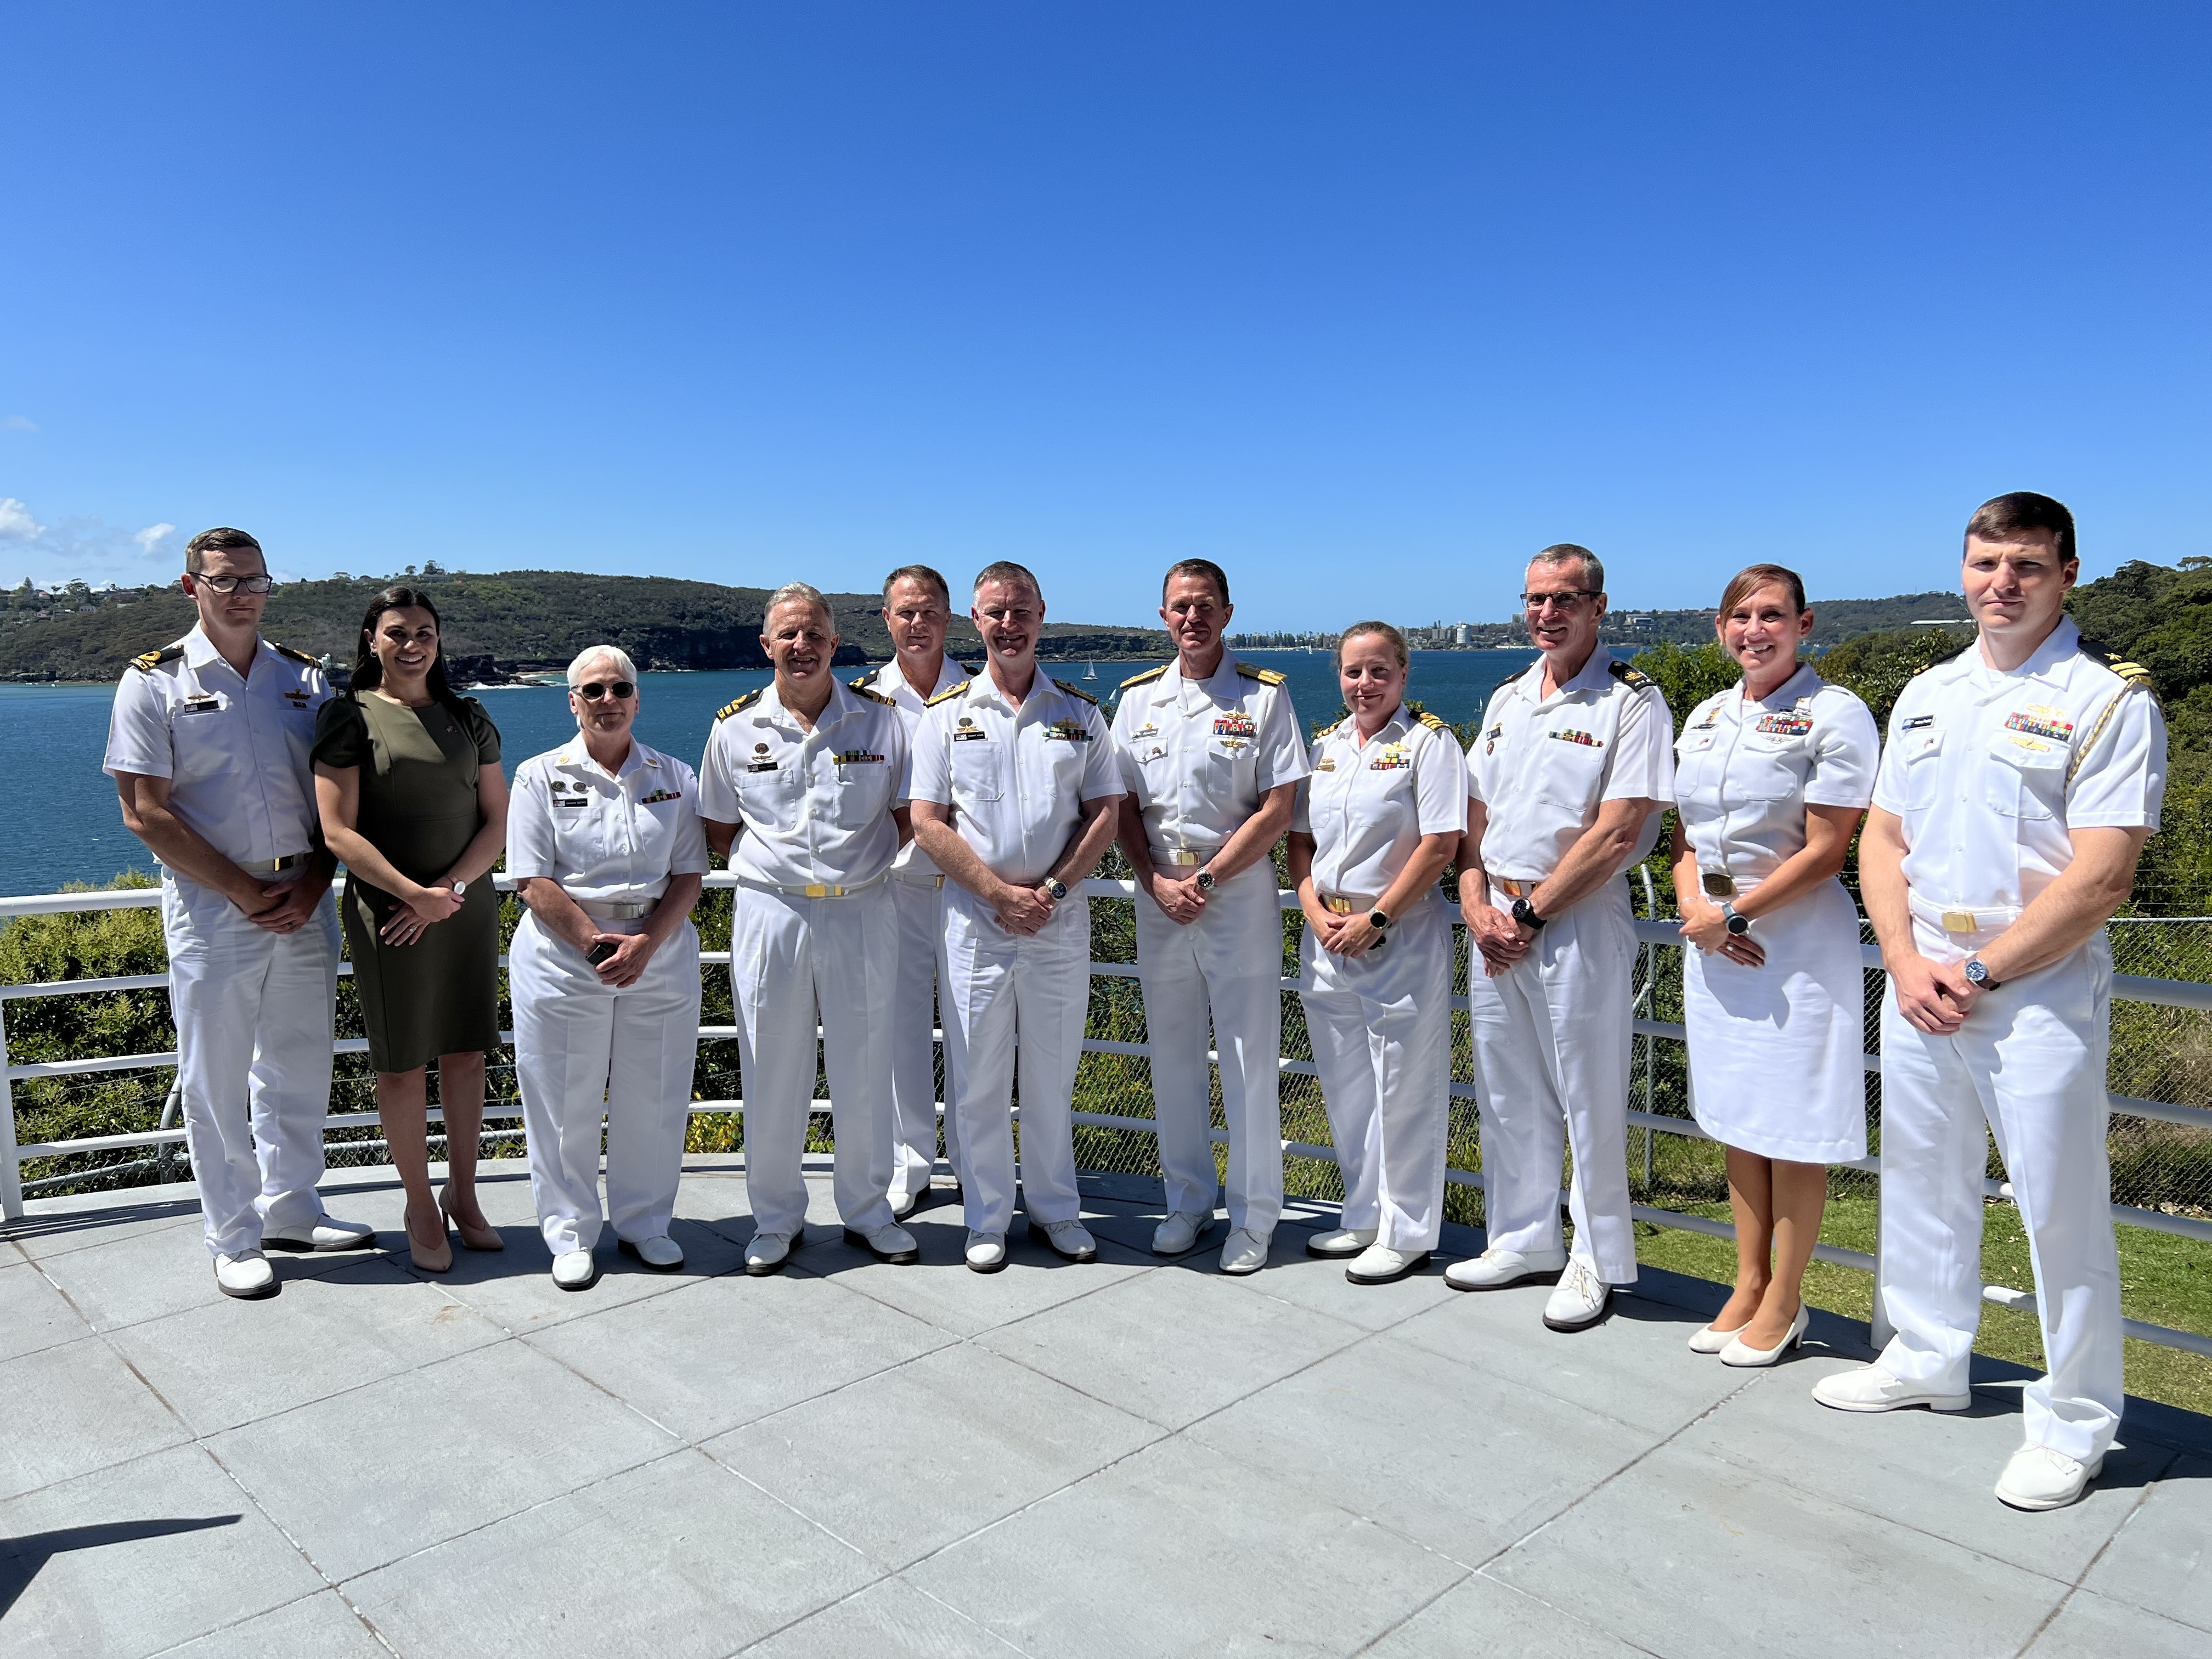 Rear Adm. Ron Piret, Commander, Naval Meteorology and Oceanography Command, visited HMAS Penguin for a tour of Australian Navy Hydrography capabilities and missions during his visit to Australia during a scheduled visit to the region, Nov 7-11, 2022.